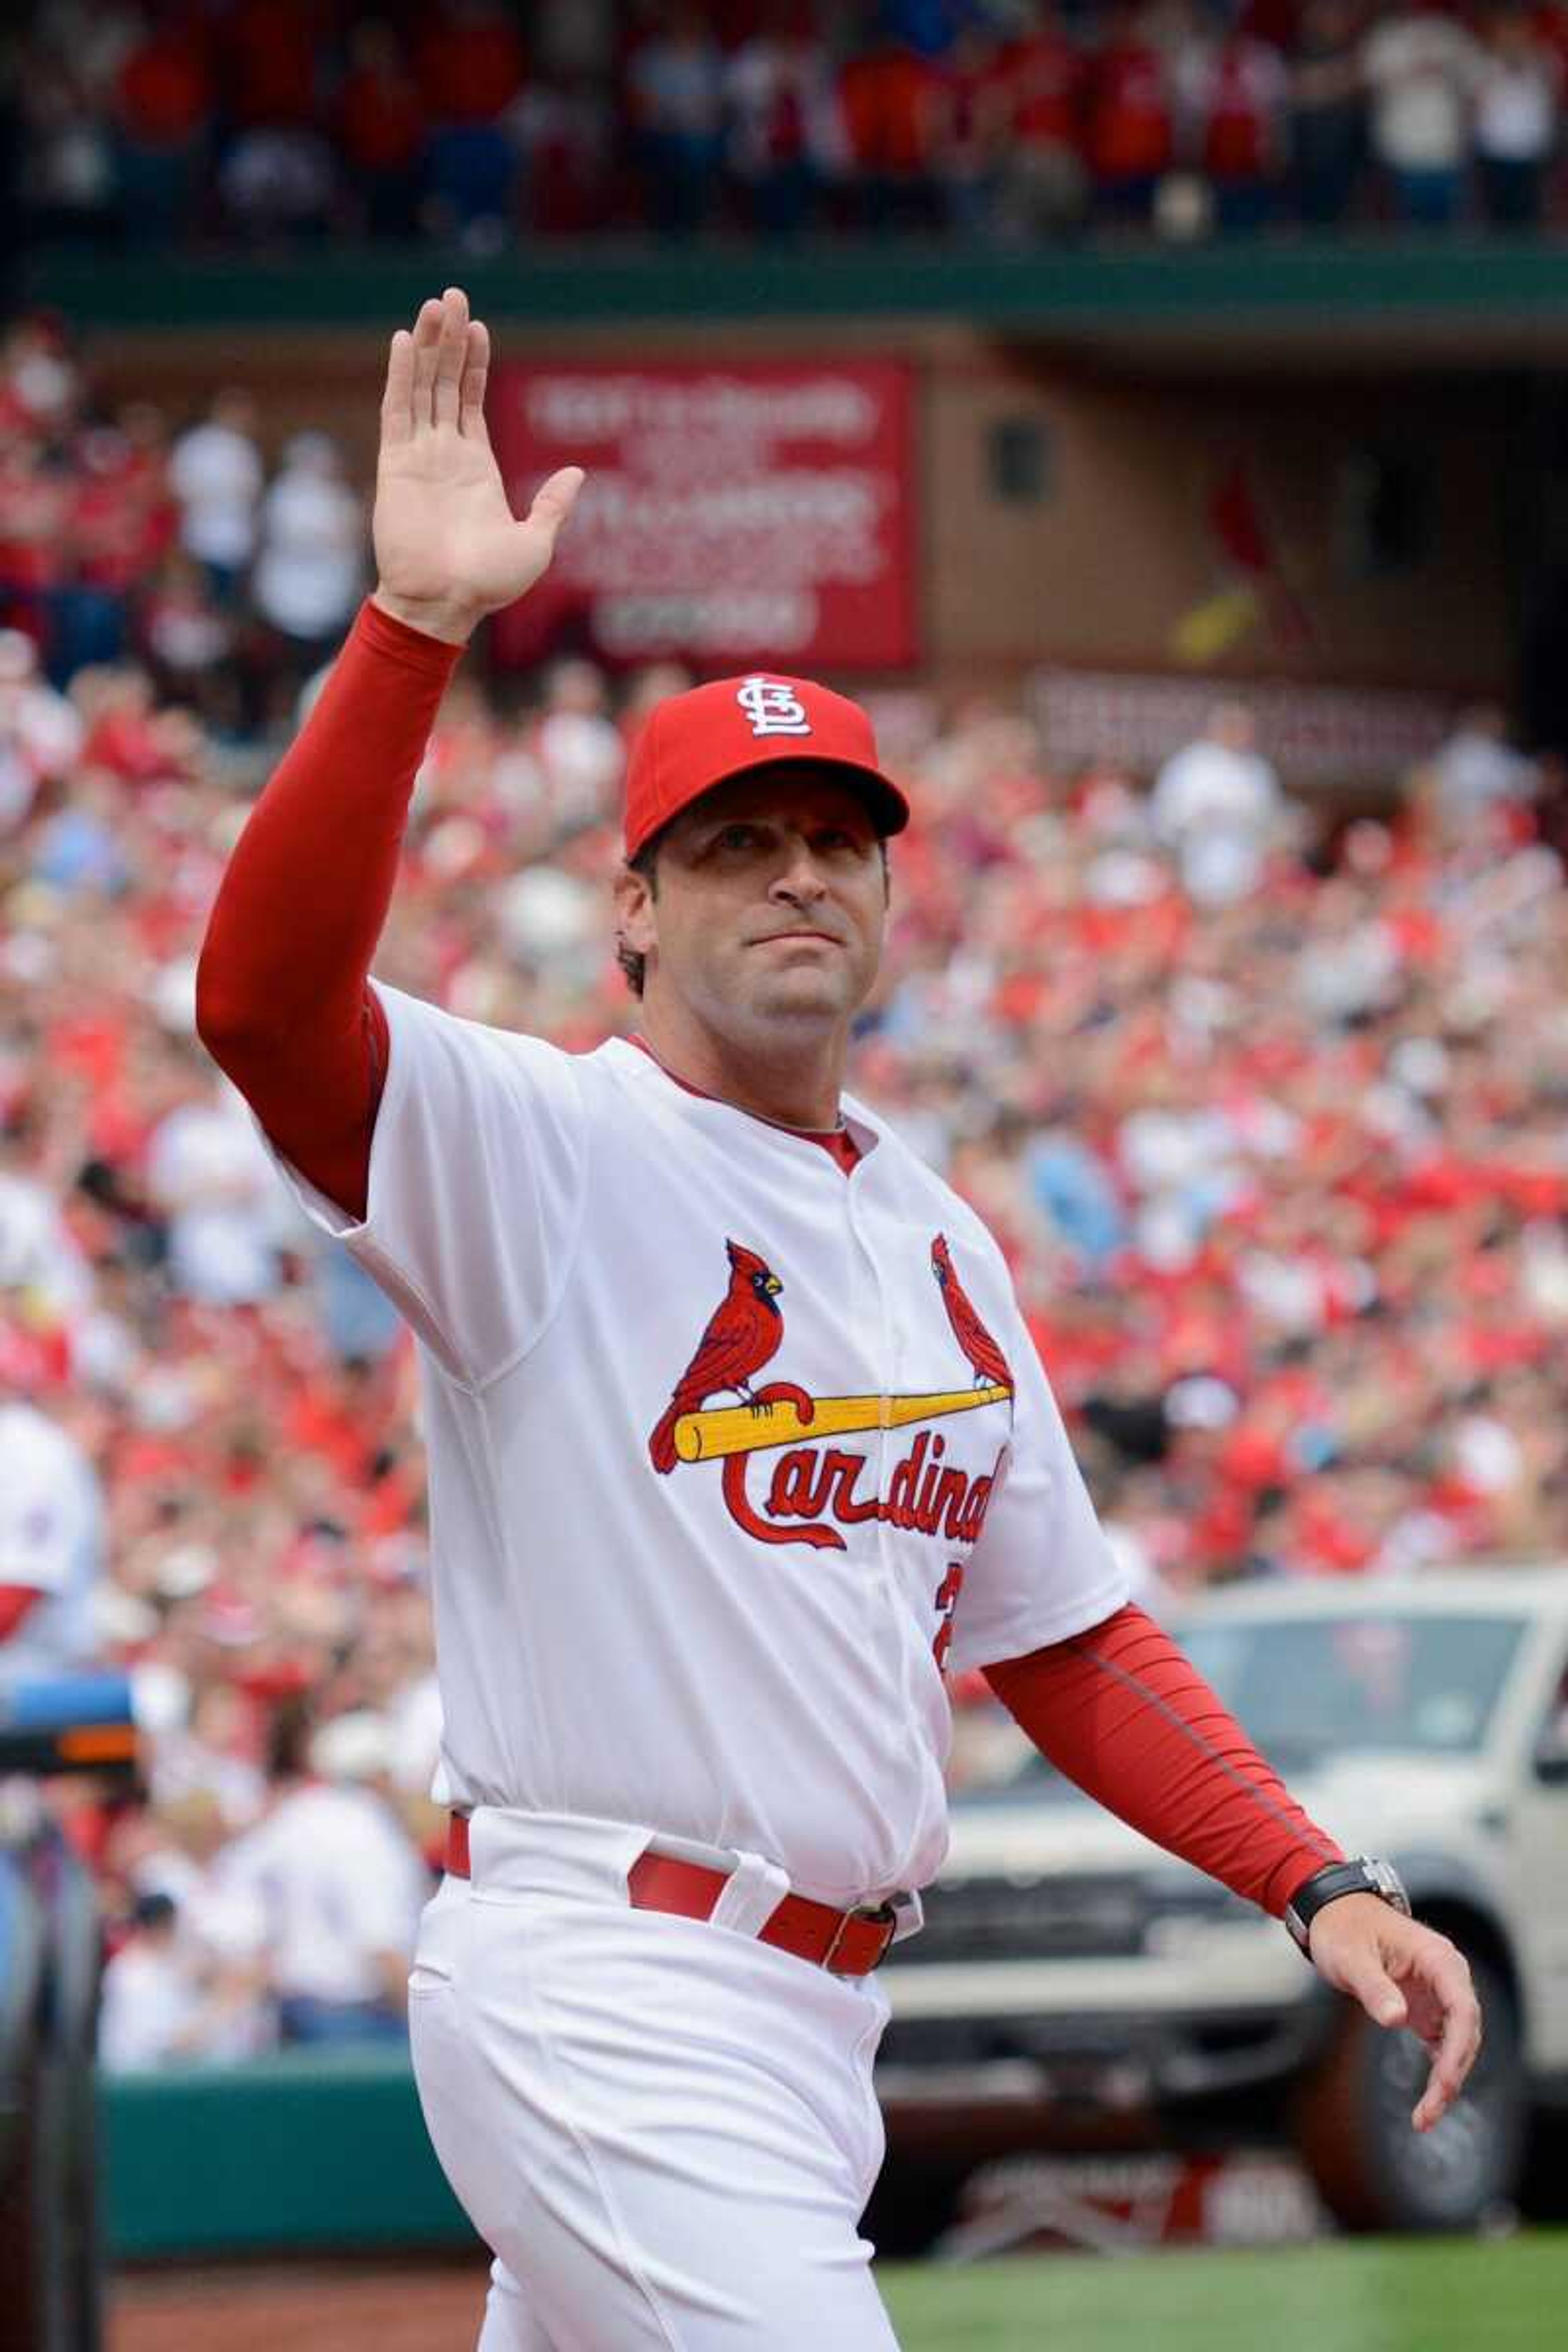 Mike Matheny waves at the crowd during Opening Day on April 8, 2013. Matheny will visit Southeast on Nov. 17 as the keynote speaker of the Arrow Success and Leadership Summit. (Photo courtesy of the St. Louis Cardinals)